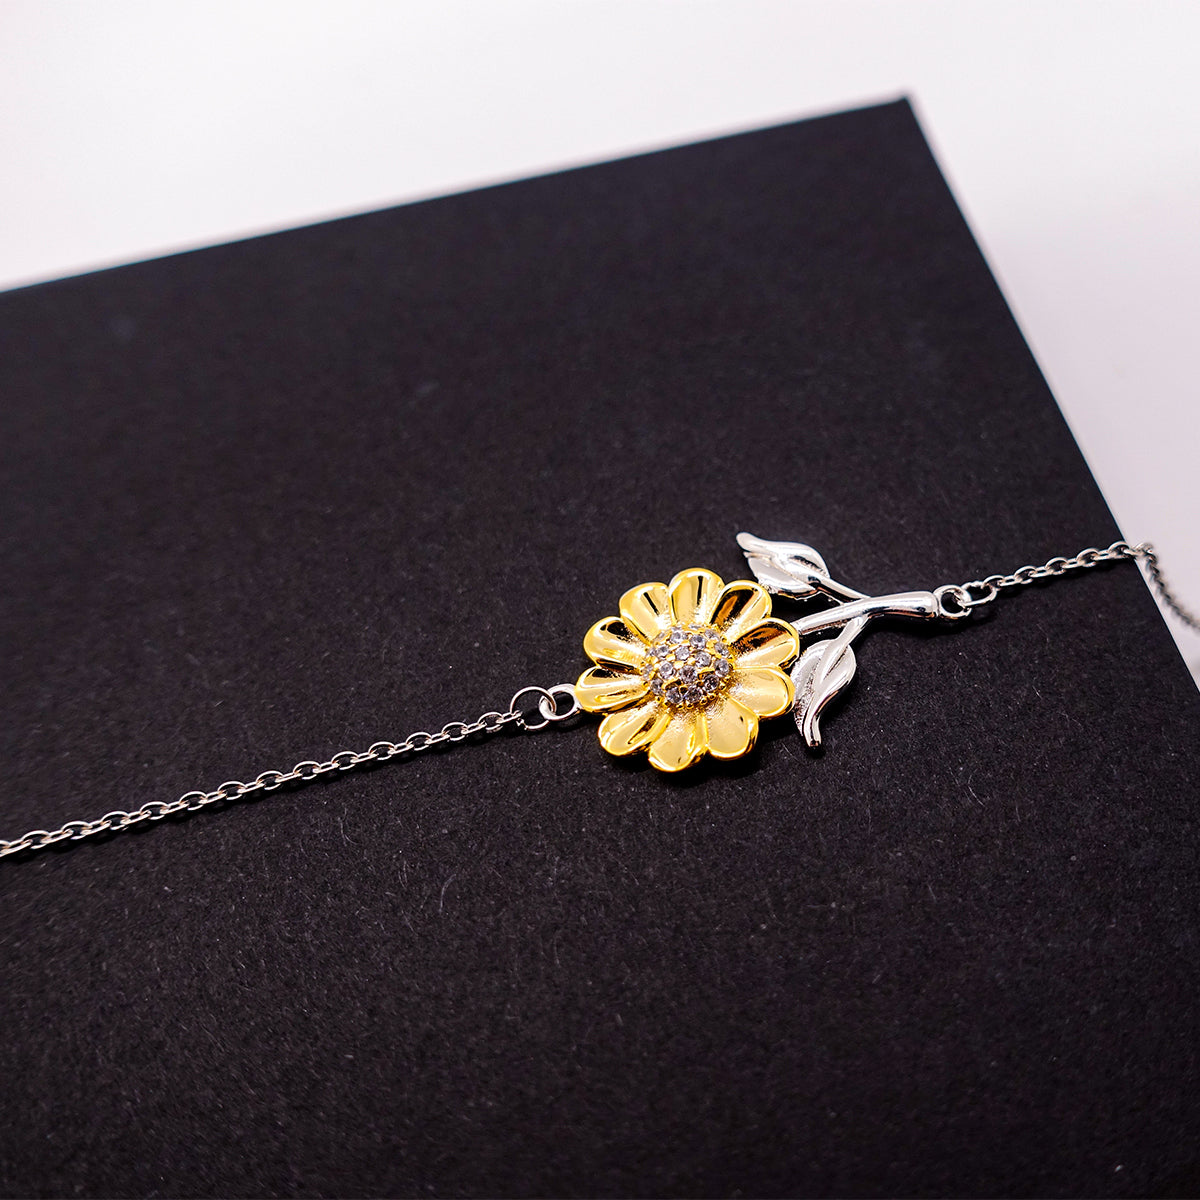 Sunflower Bracelet Grampy - Always in my Heart Engraved Jewelry for Christmas and Graduation Gift Ideas